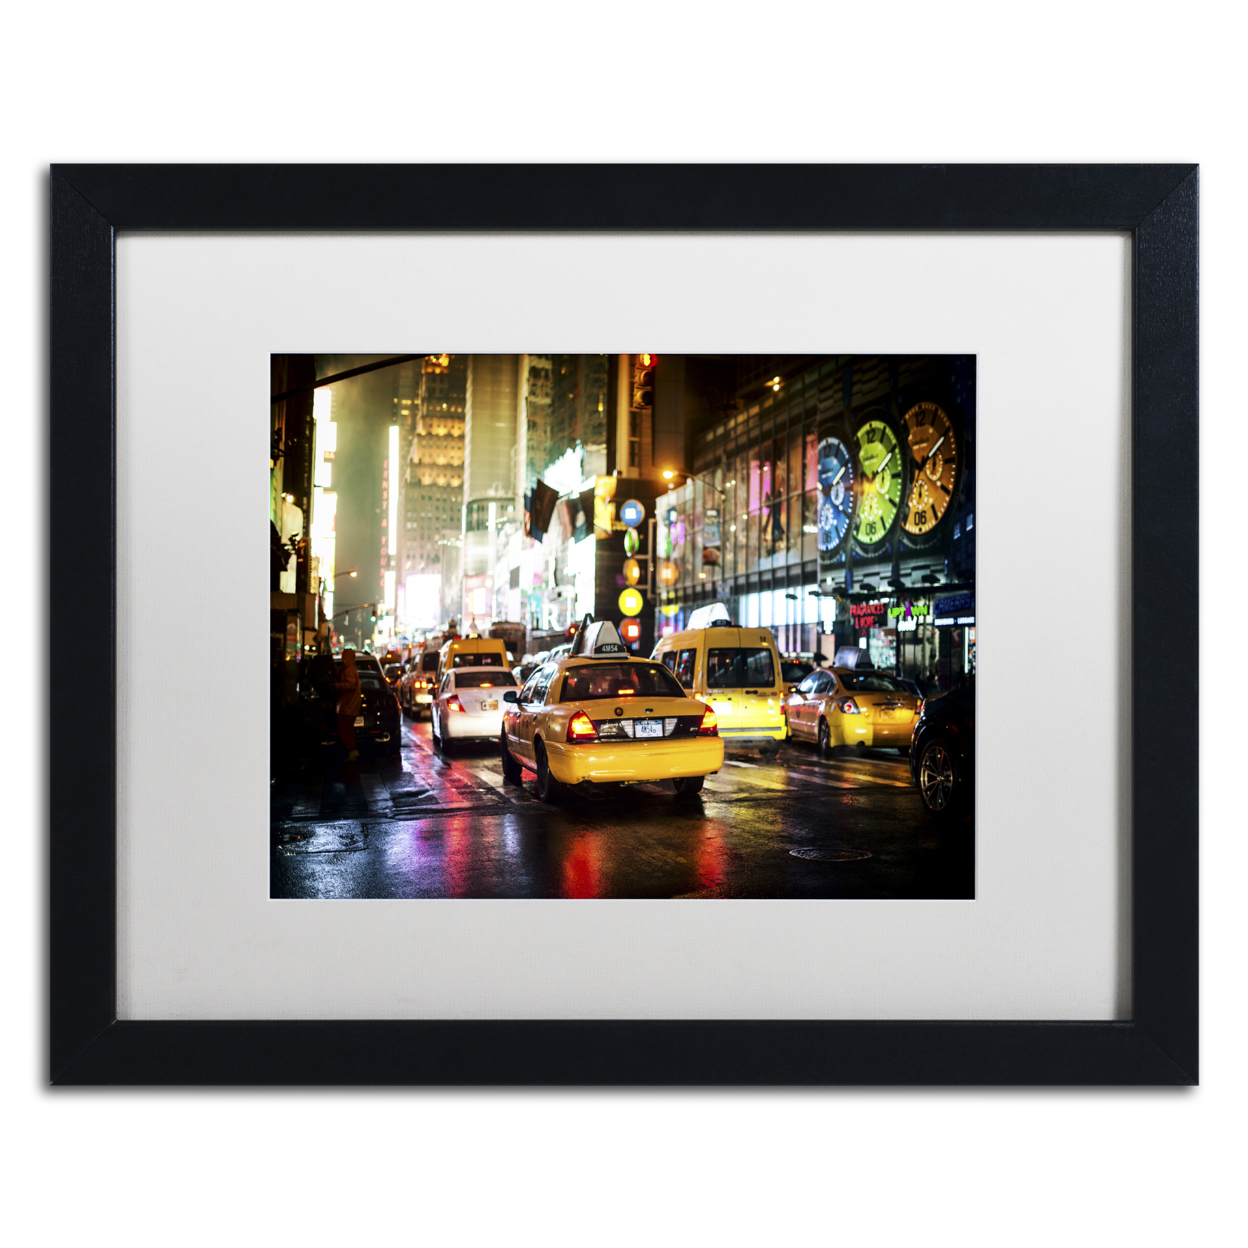 Philippe Hugonnard 'Time Night NYC' Black Wooden Framed Art 18 X 22 Inches